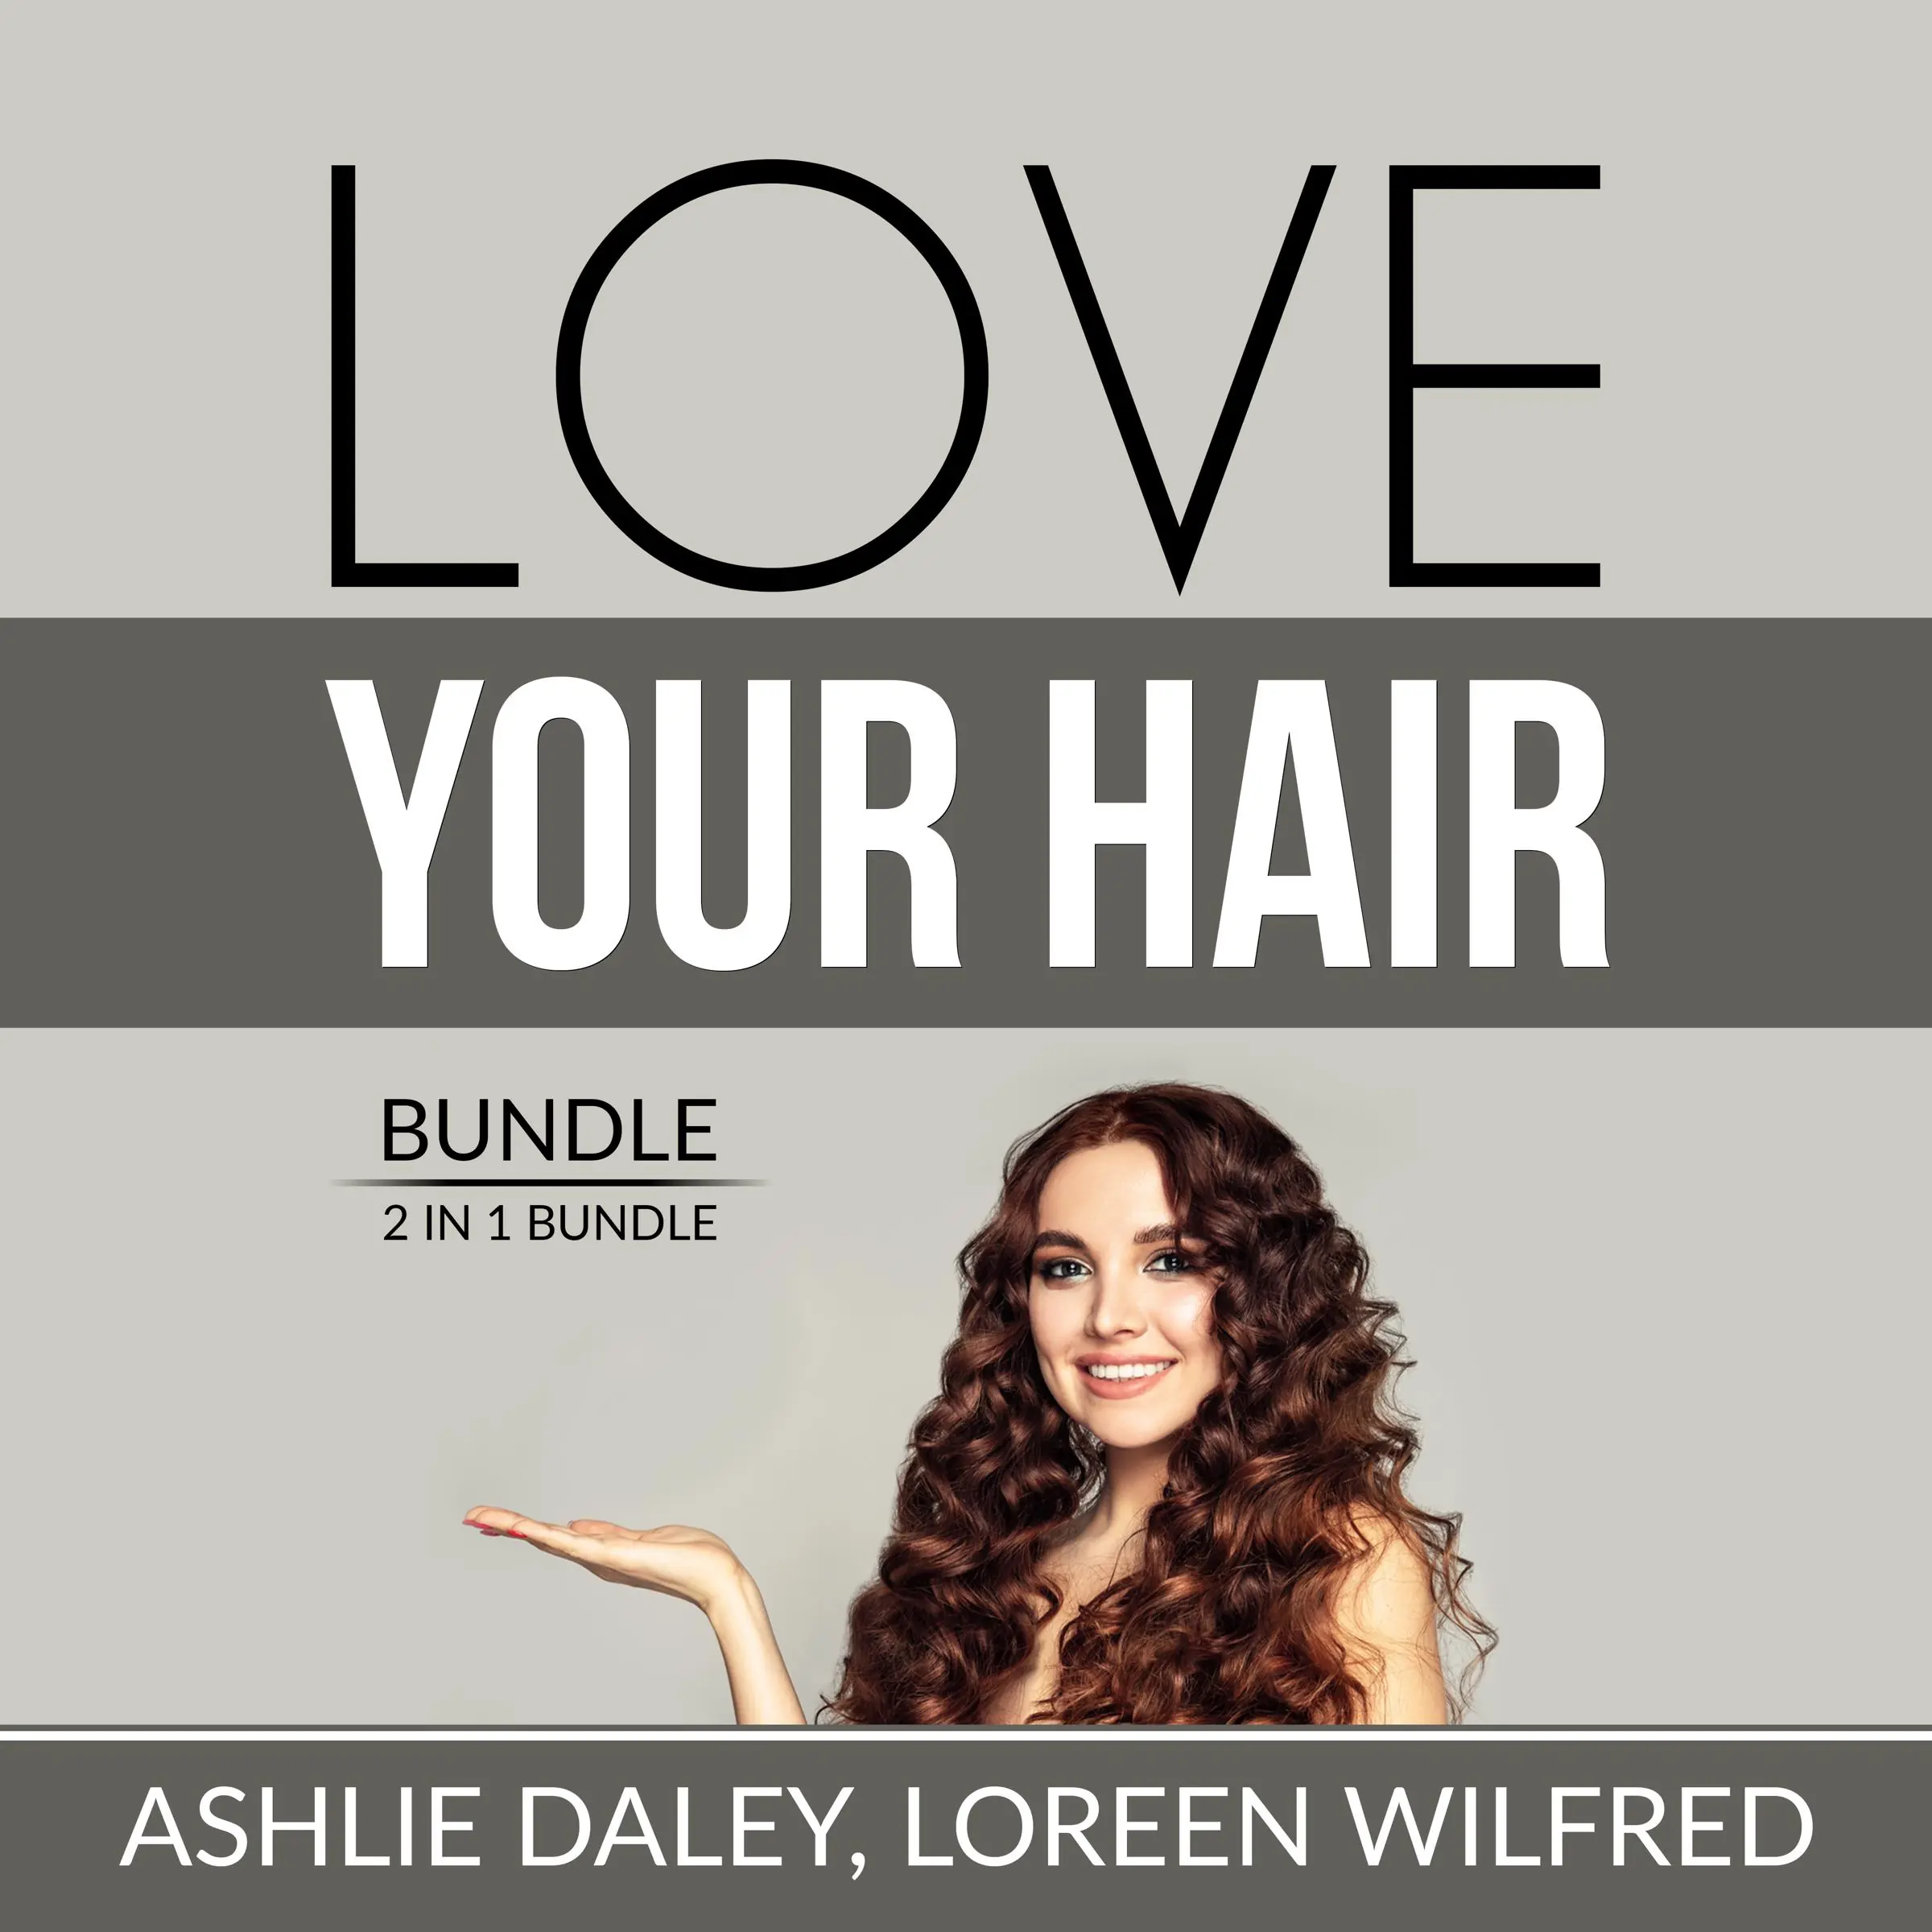 Love Your Hair Bundle: 2 in 1 Bundle, Hair Care Tips and The Hair Bible Audiobook by and Loreen Wilfred